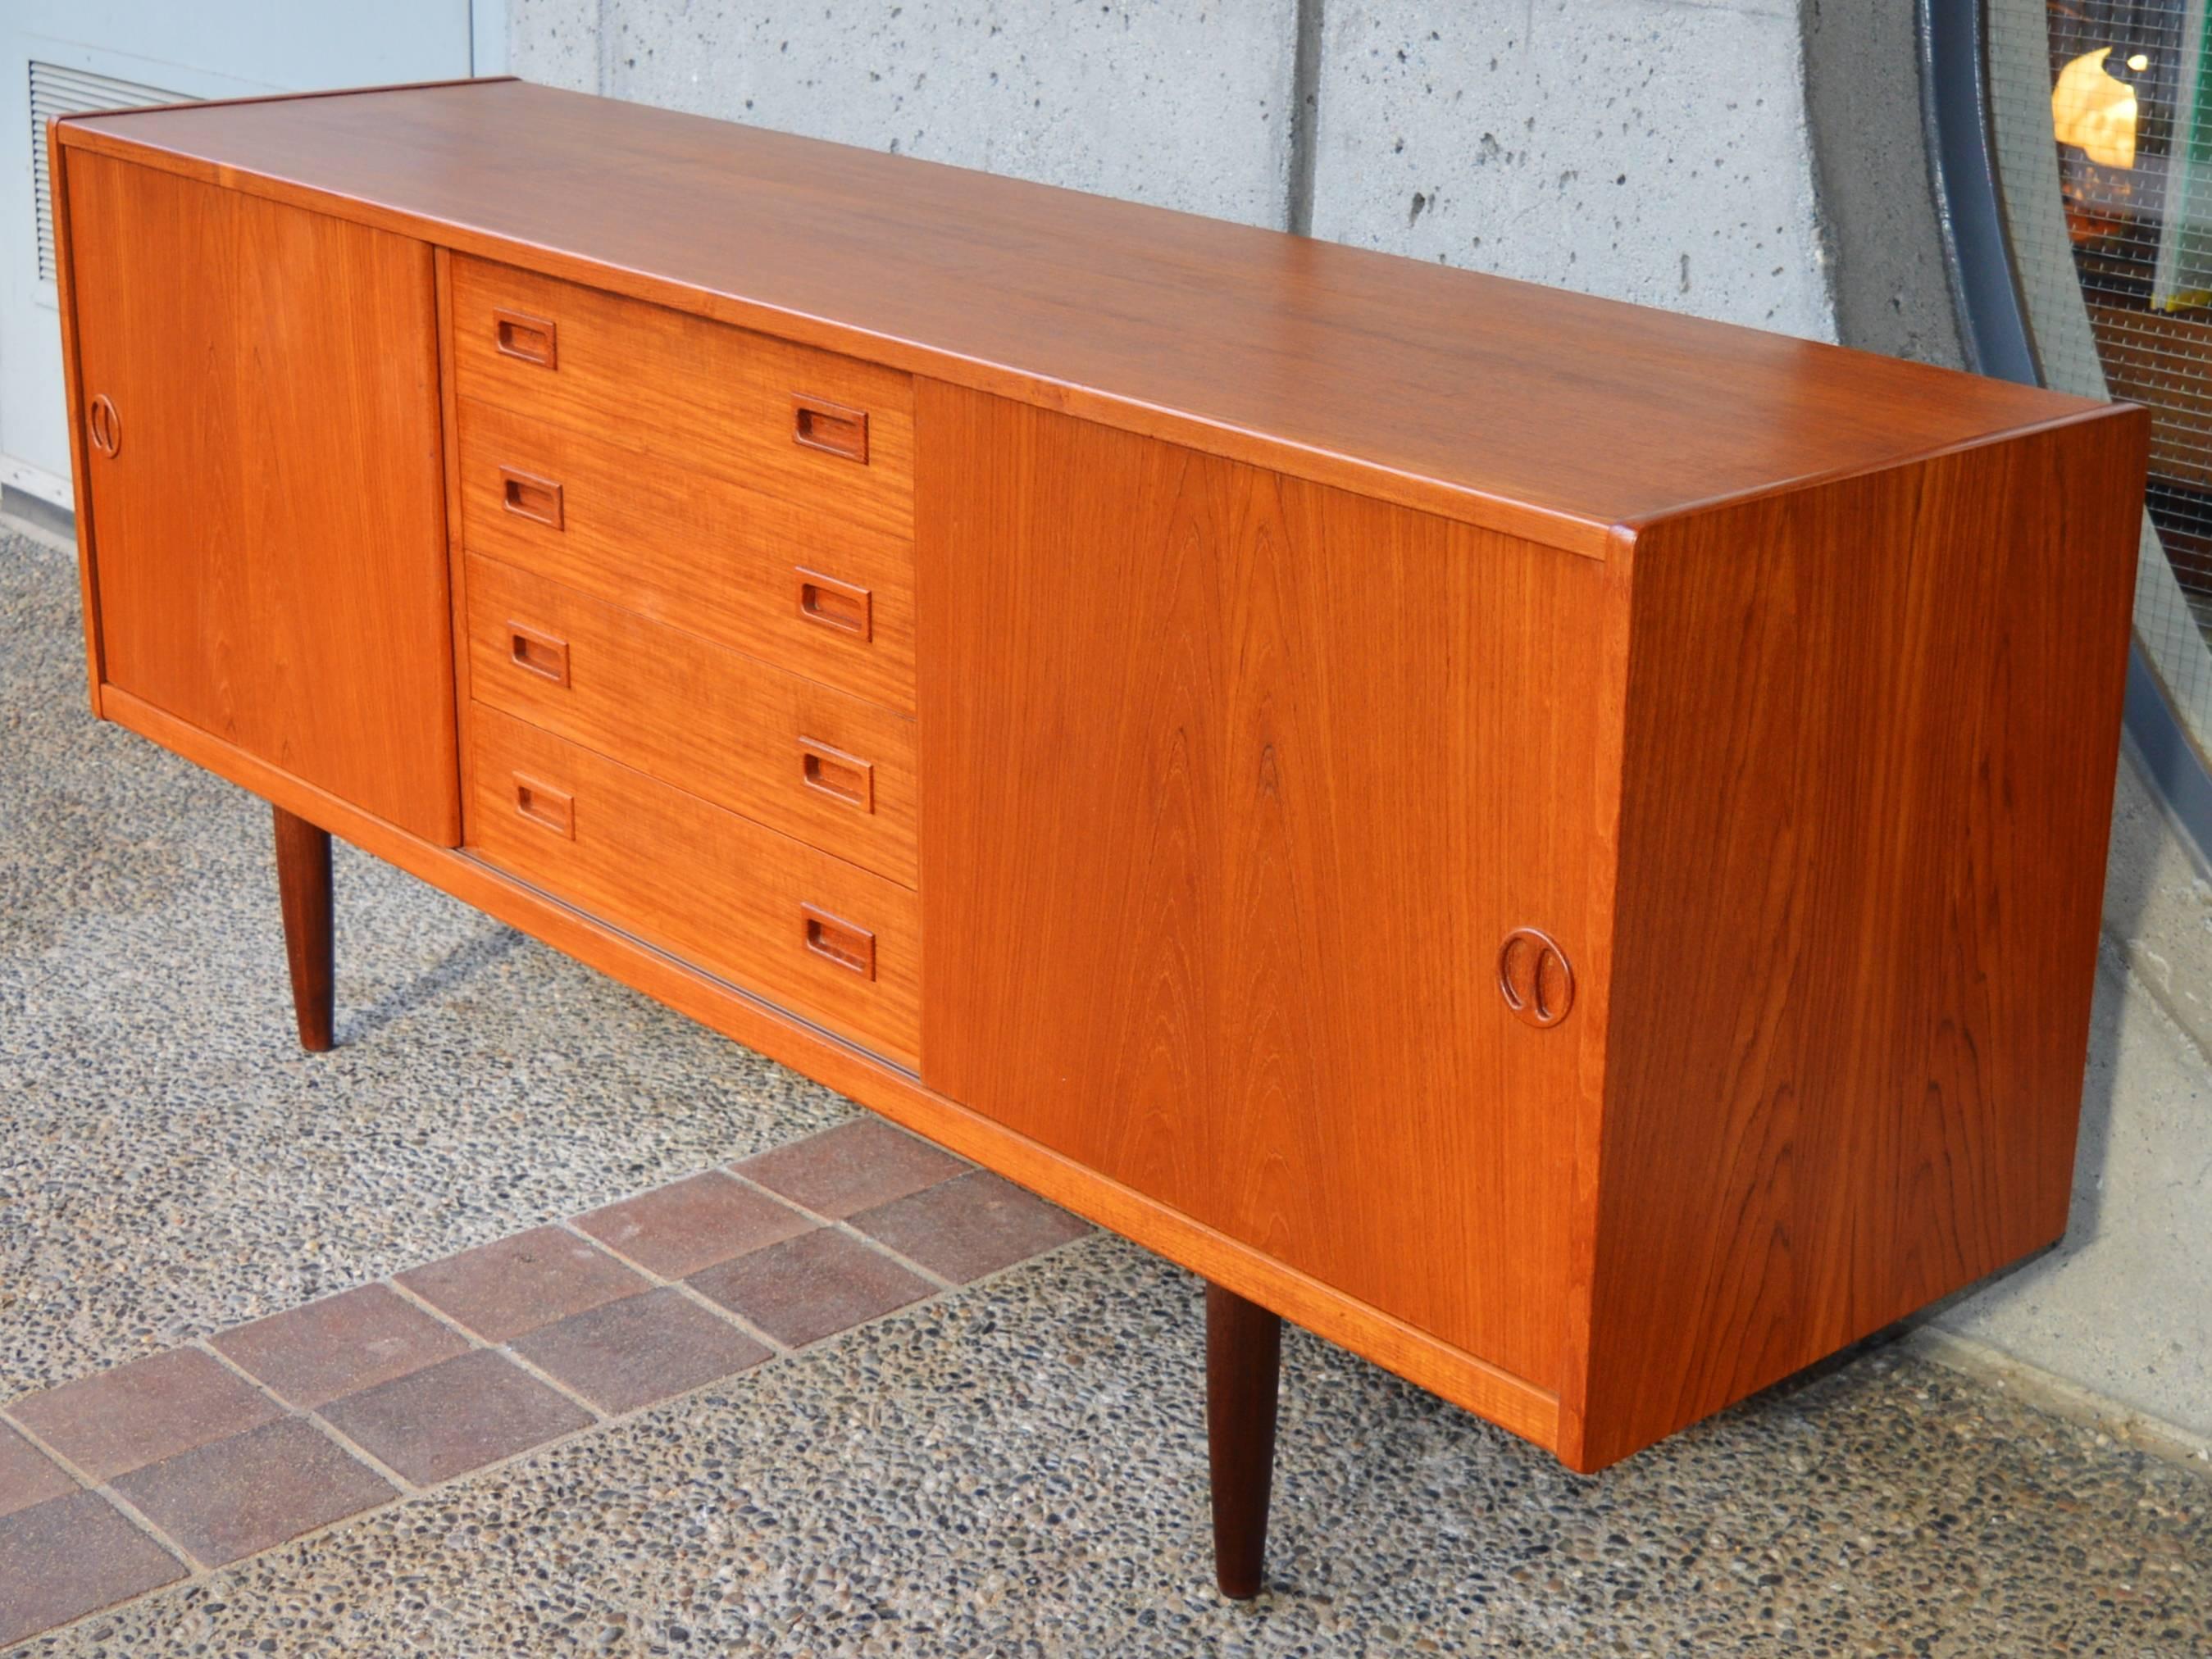 Mid-20th Century Teak Credenza or Buffet with Centre Drawers and Finished Back, Scandinavian